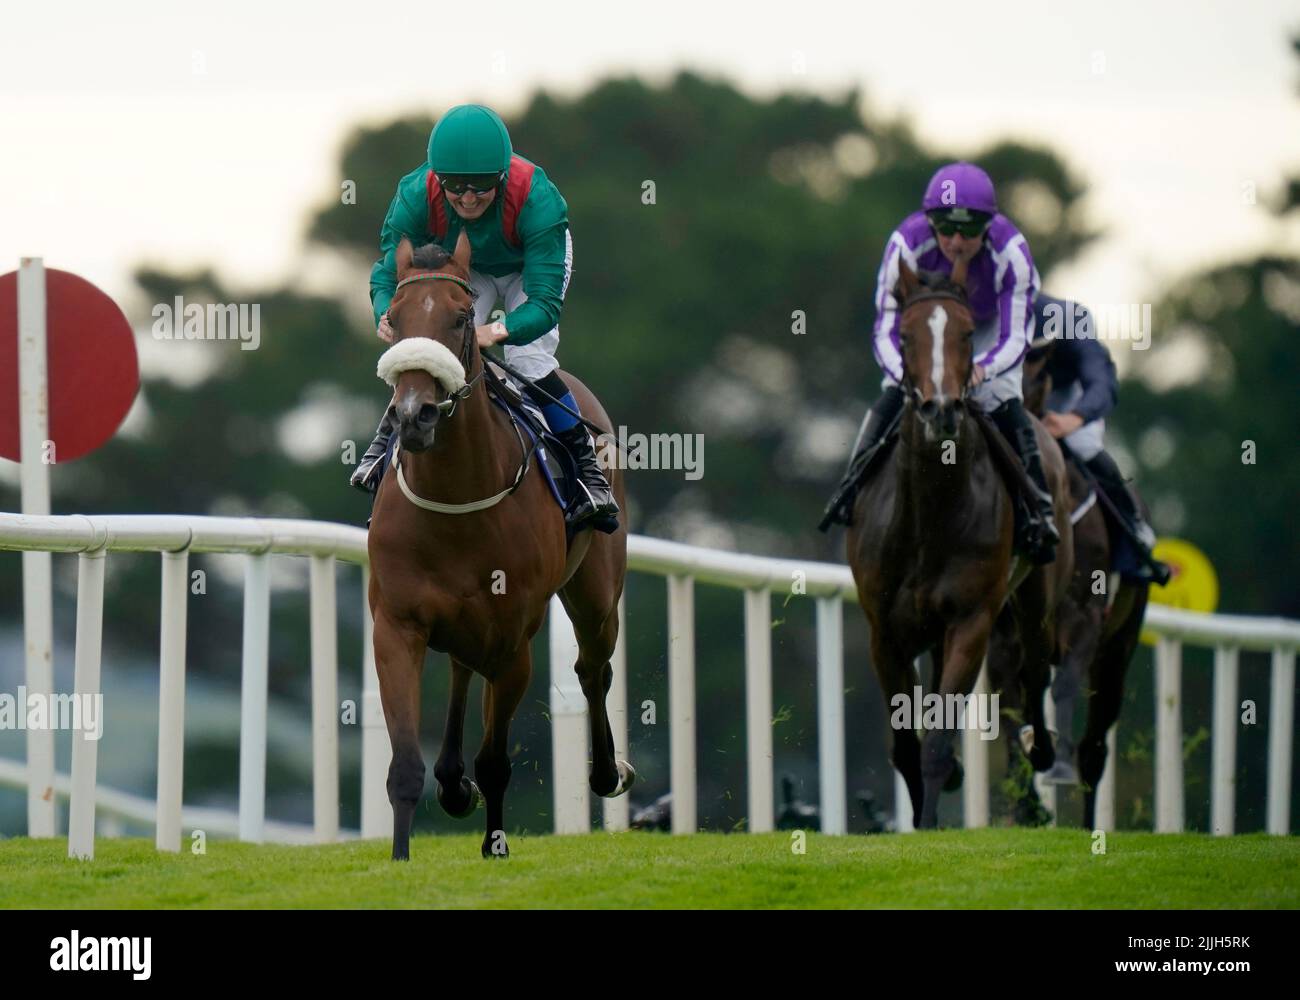 Tahiyra ridden by Chris Hughes wins the third race during day two of the Galway Races Summer Festival 2022 at Galway Racecourse in County Galway, Ireland. Picture date: Tuesday July 26, 2022. Stock Photo